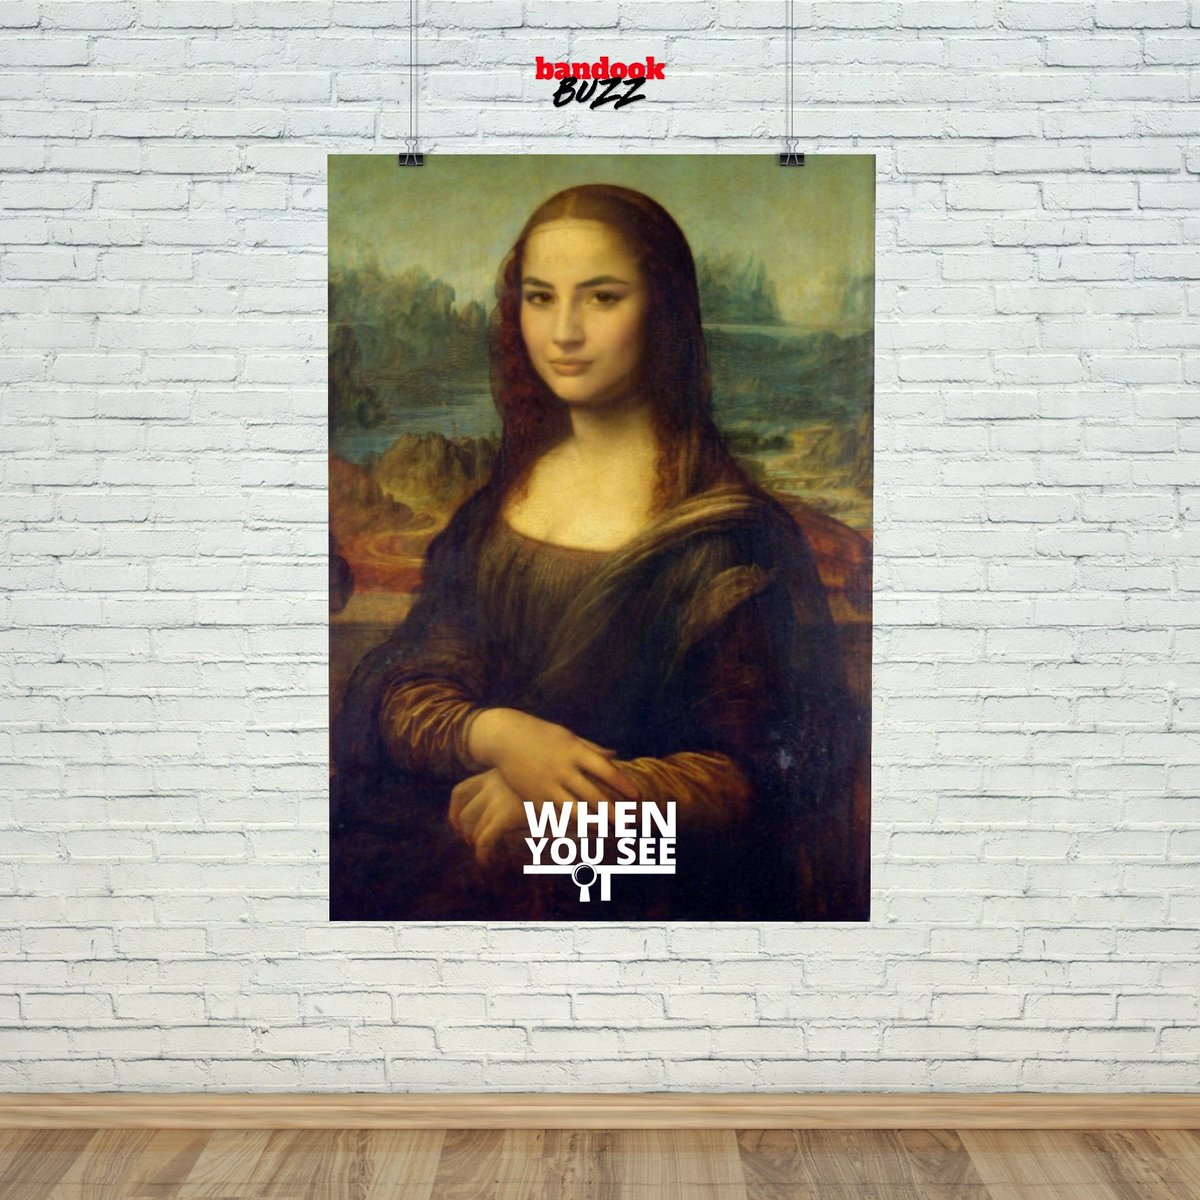 MASTERPIECE. 

#PehchaanKaun and tag this singer/actor in the comments.

#whenyouseeit #guesswho #guessthesinger #monalisa #masterpiece #bandookWantsToKnow #bandookBuzz #bandook